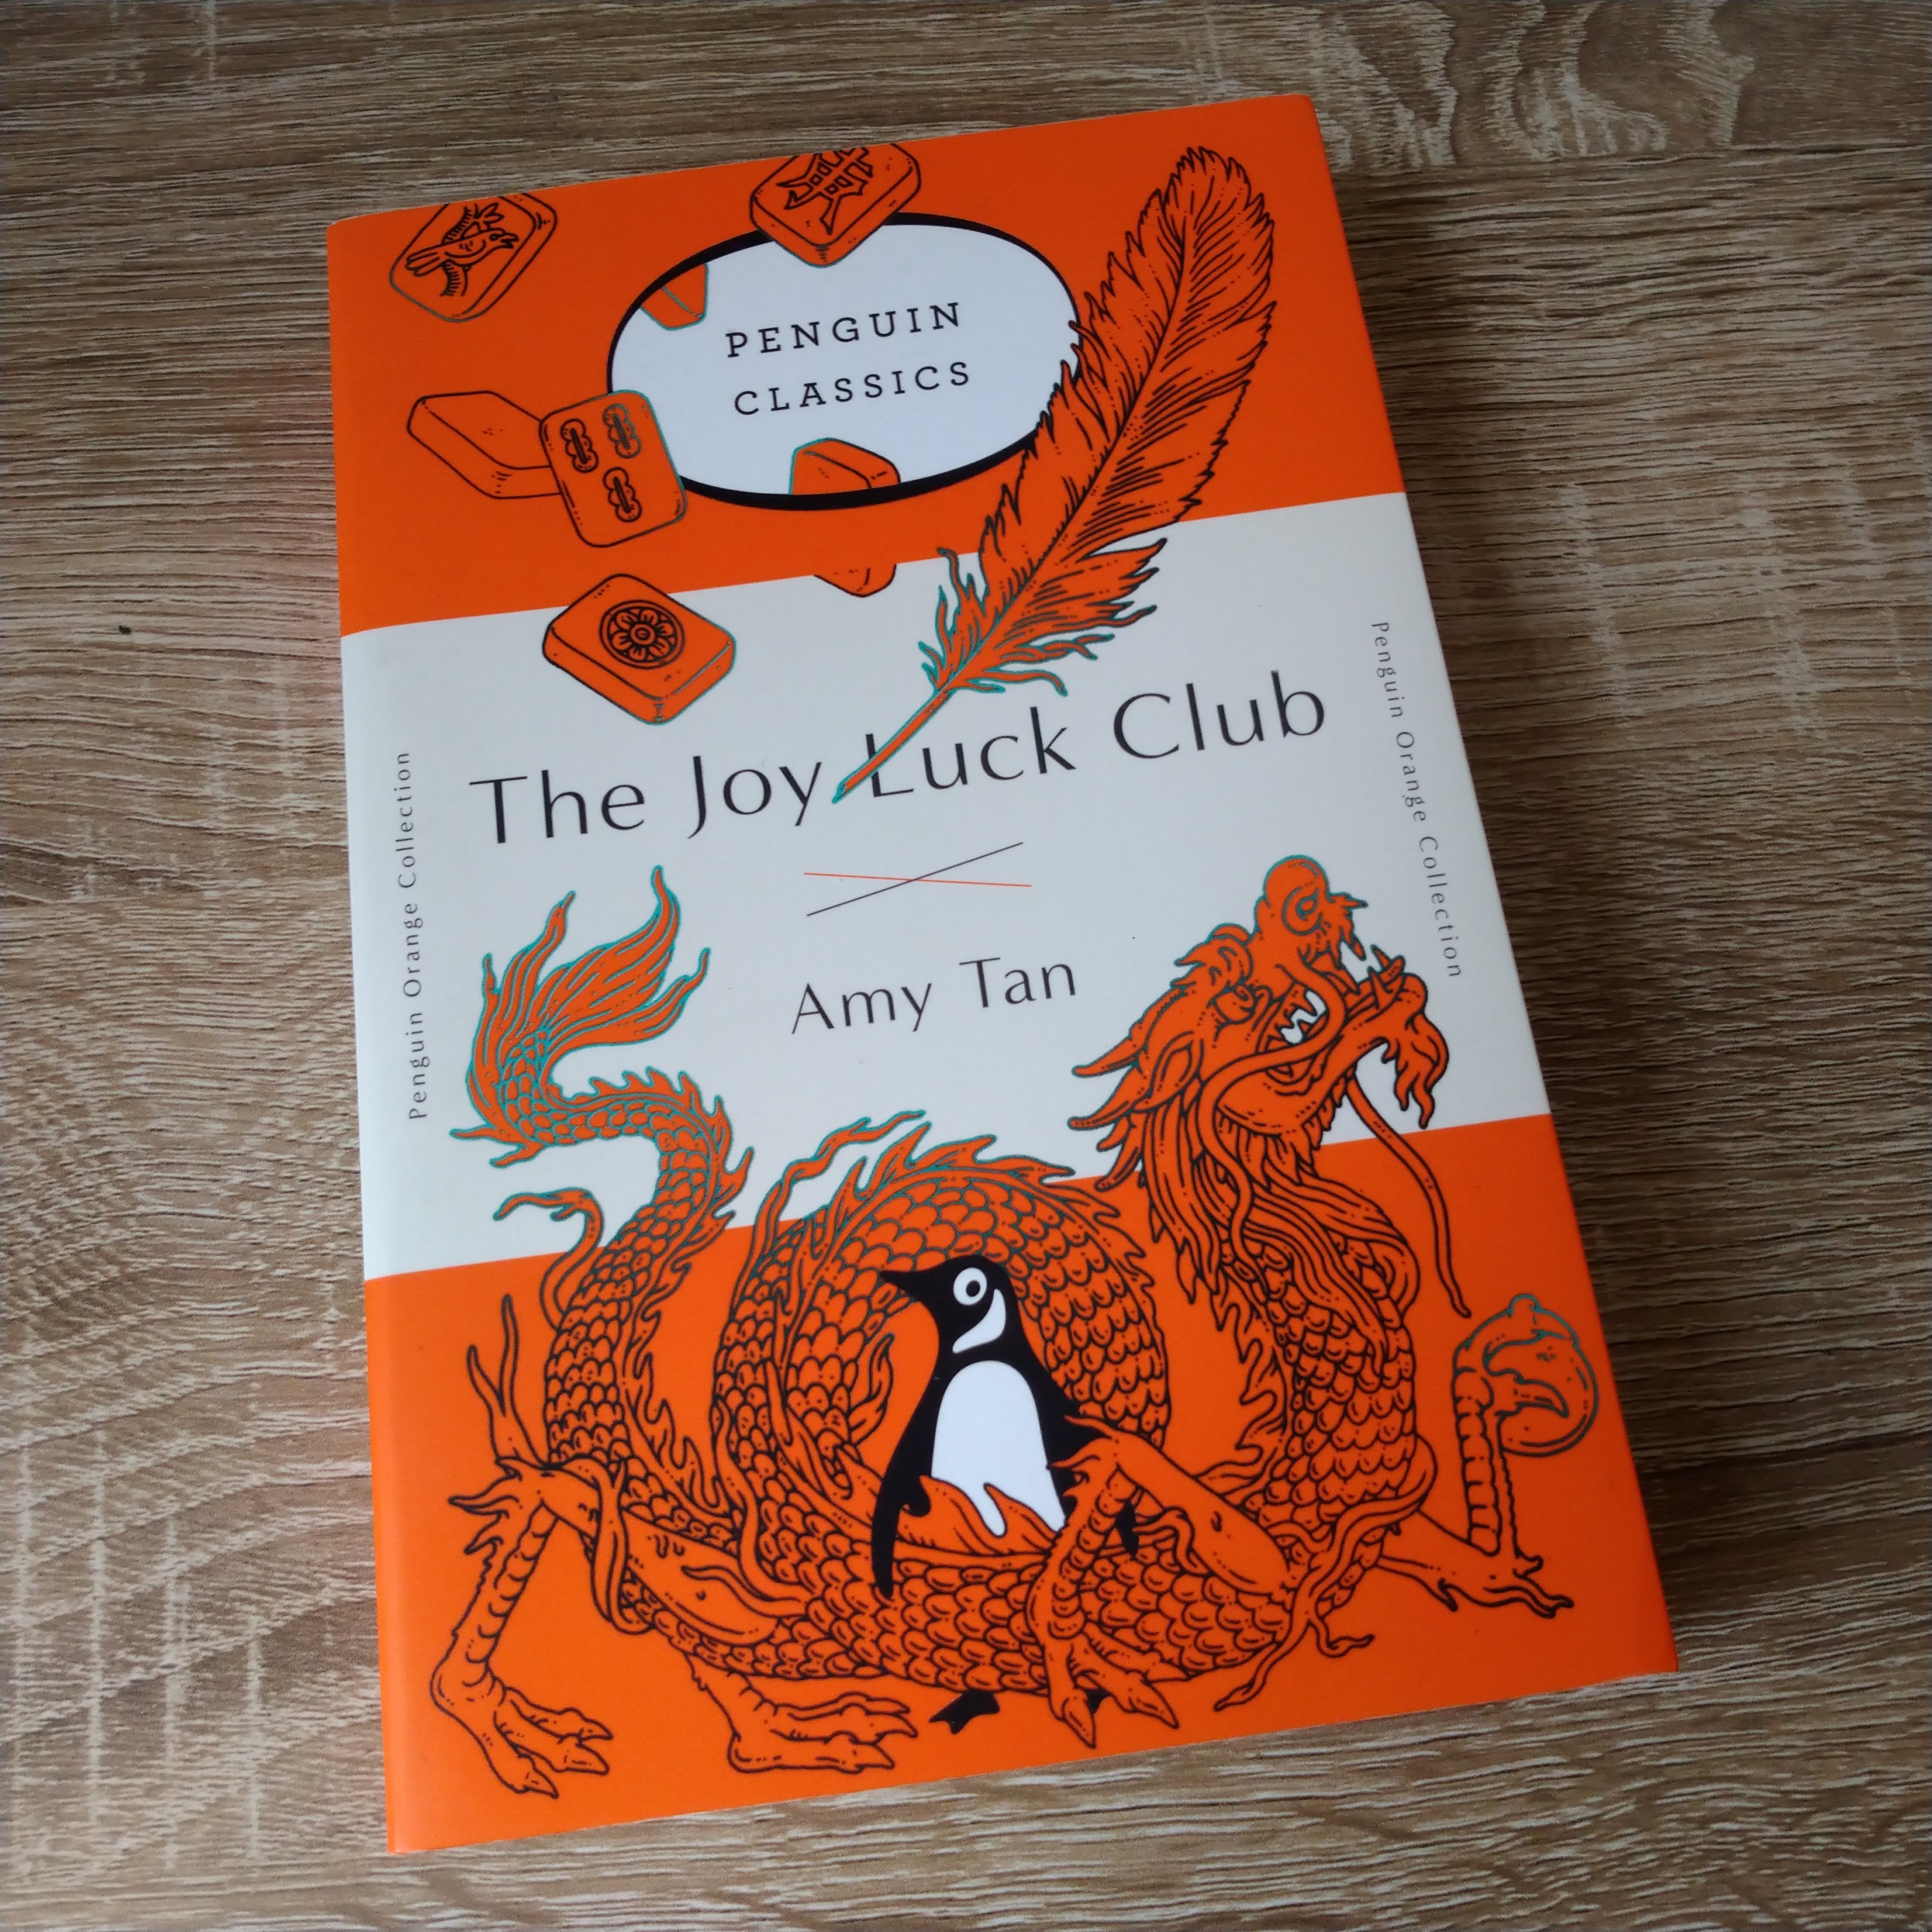 An image of a book with an orange penguin classics cover illustrated with an intricate dragon and feathers around the traditional penguin logo